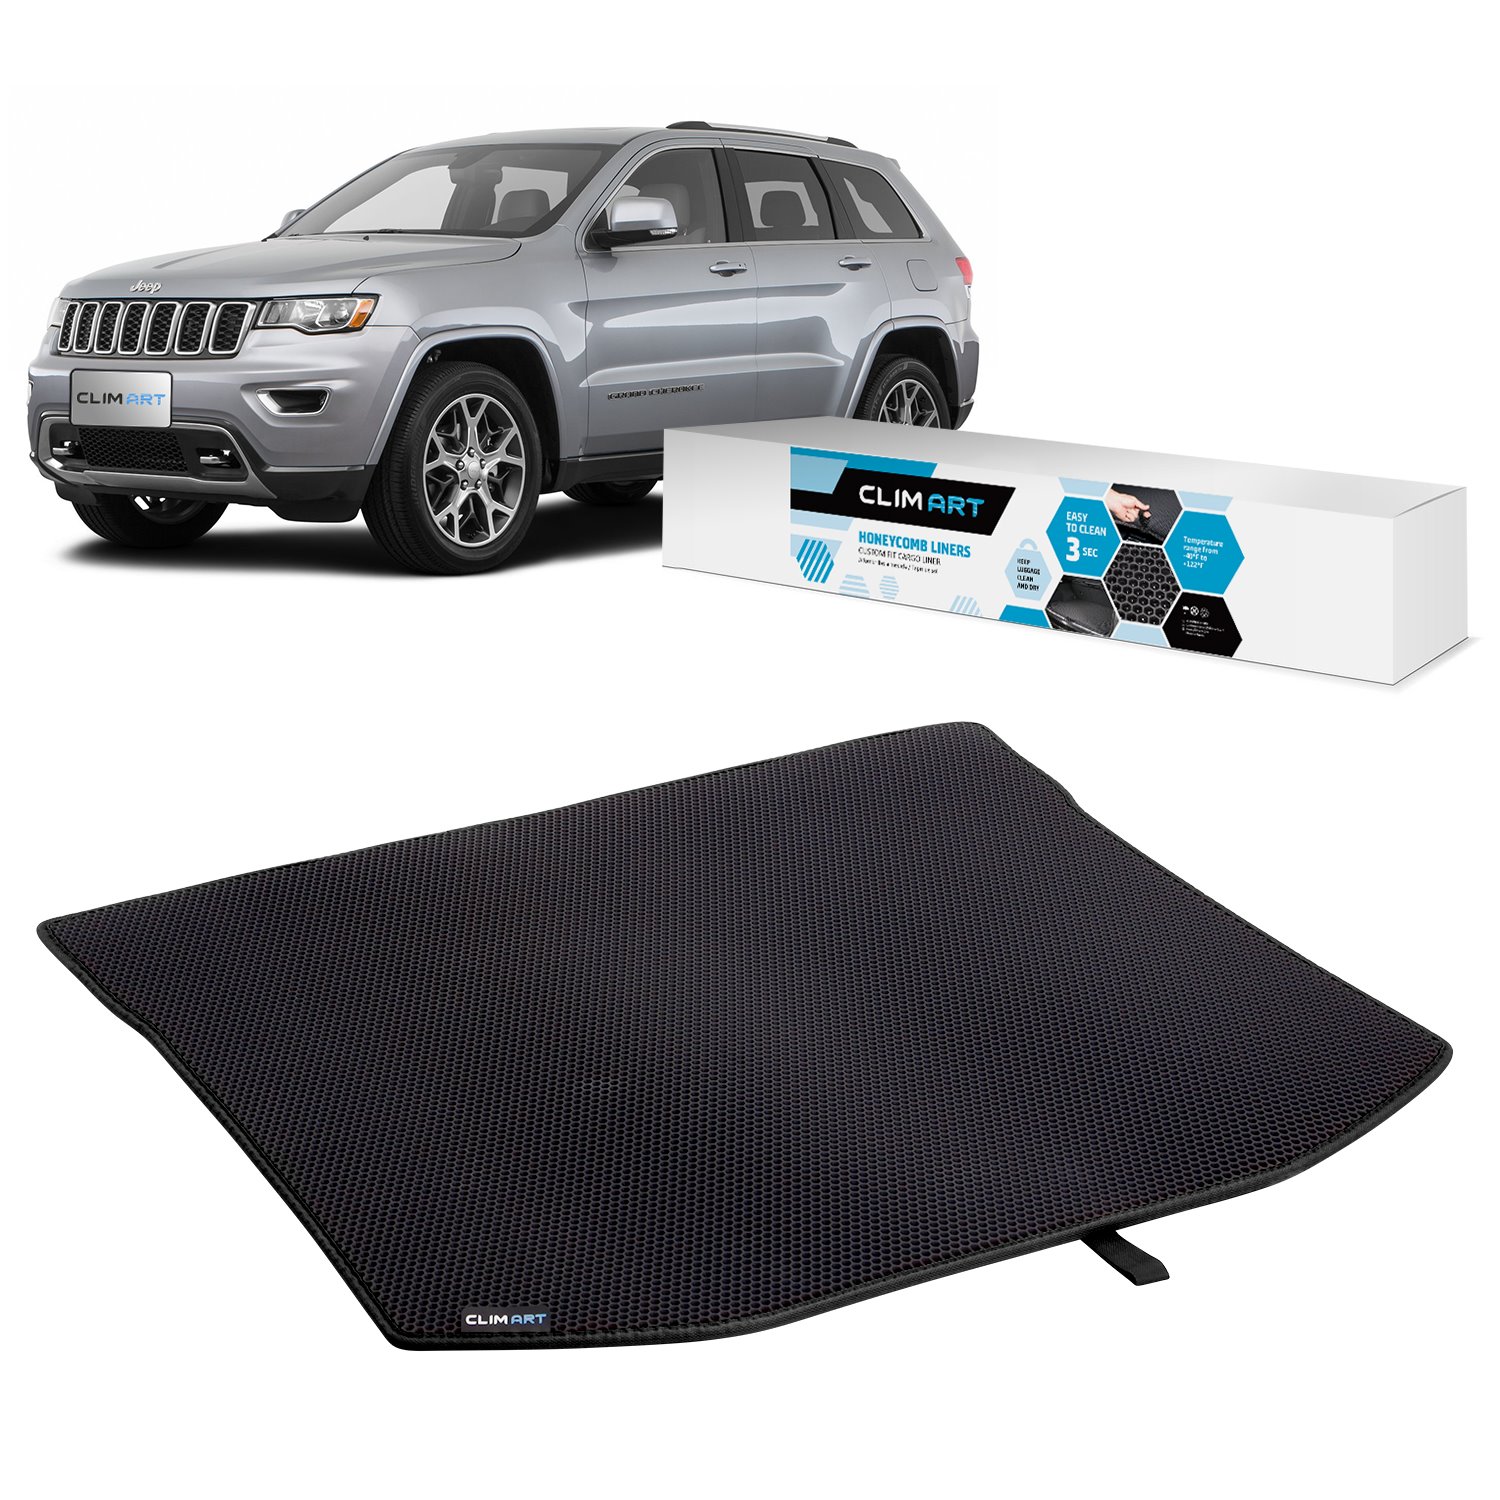 CLIM ART Honeycomb Custom Fit Cargo Liner for 2011-2021 Jeep Grand Cherokee